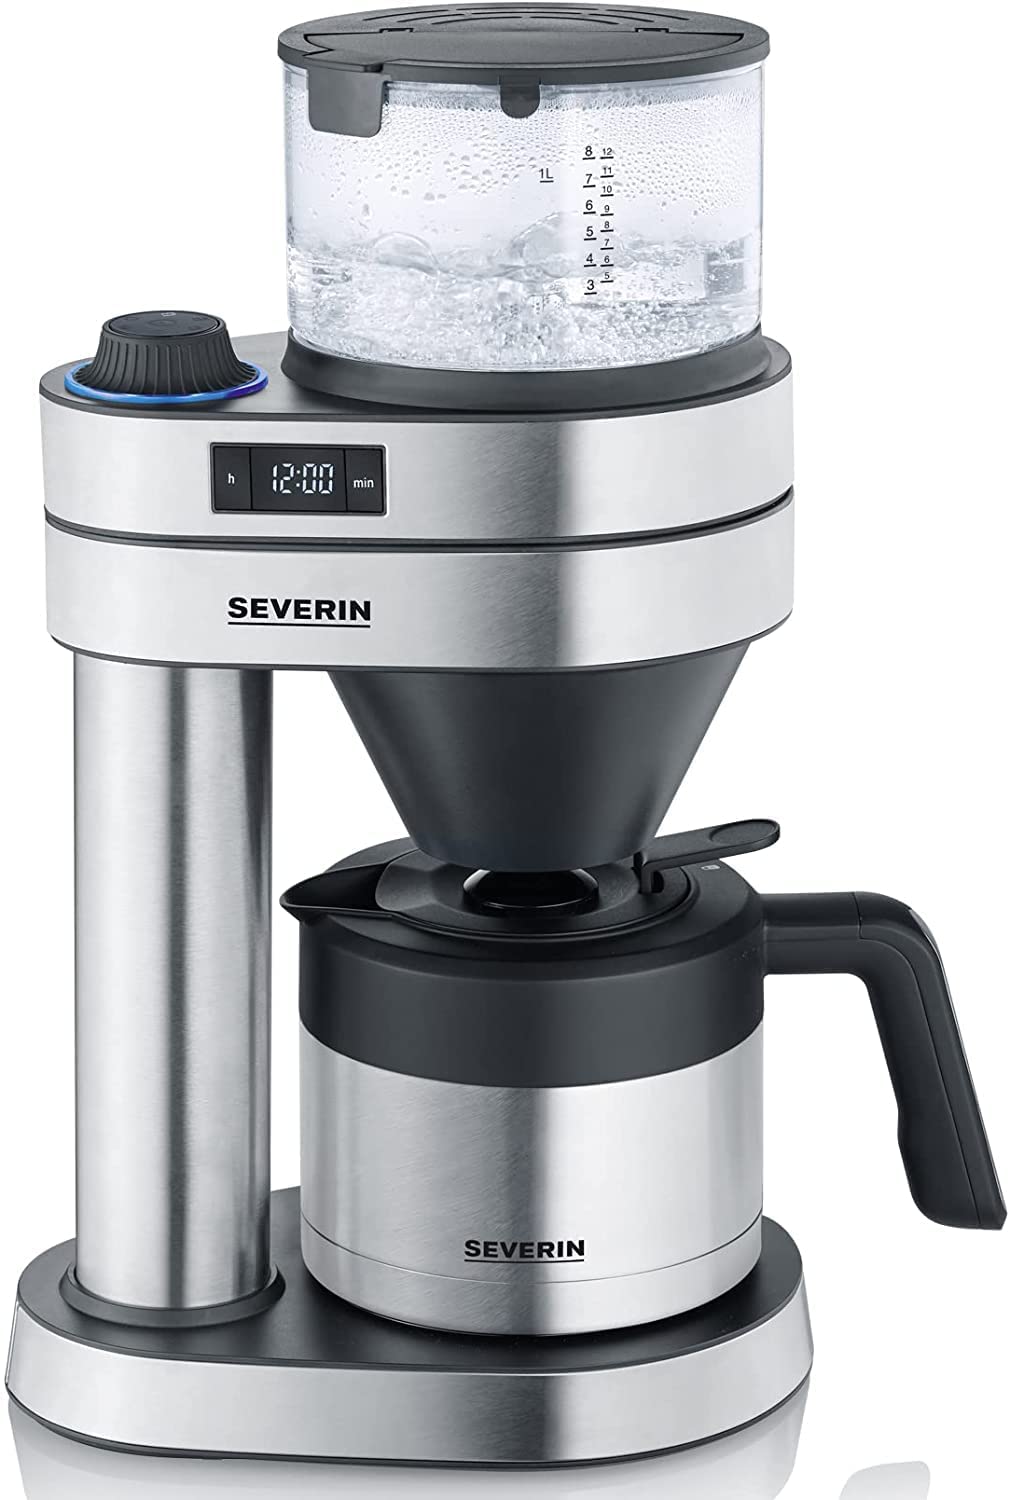 SEVERIN Caprice KA 5761 Filter Coffee Machine with Thermos Jug, Hand-Brew Coffee Maker for up to 8 Cups, Coffee Machine with Timer, Brushed Stainless Steel / Black